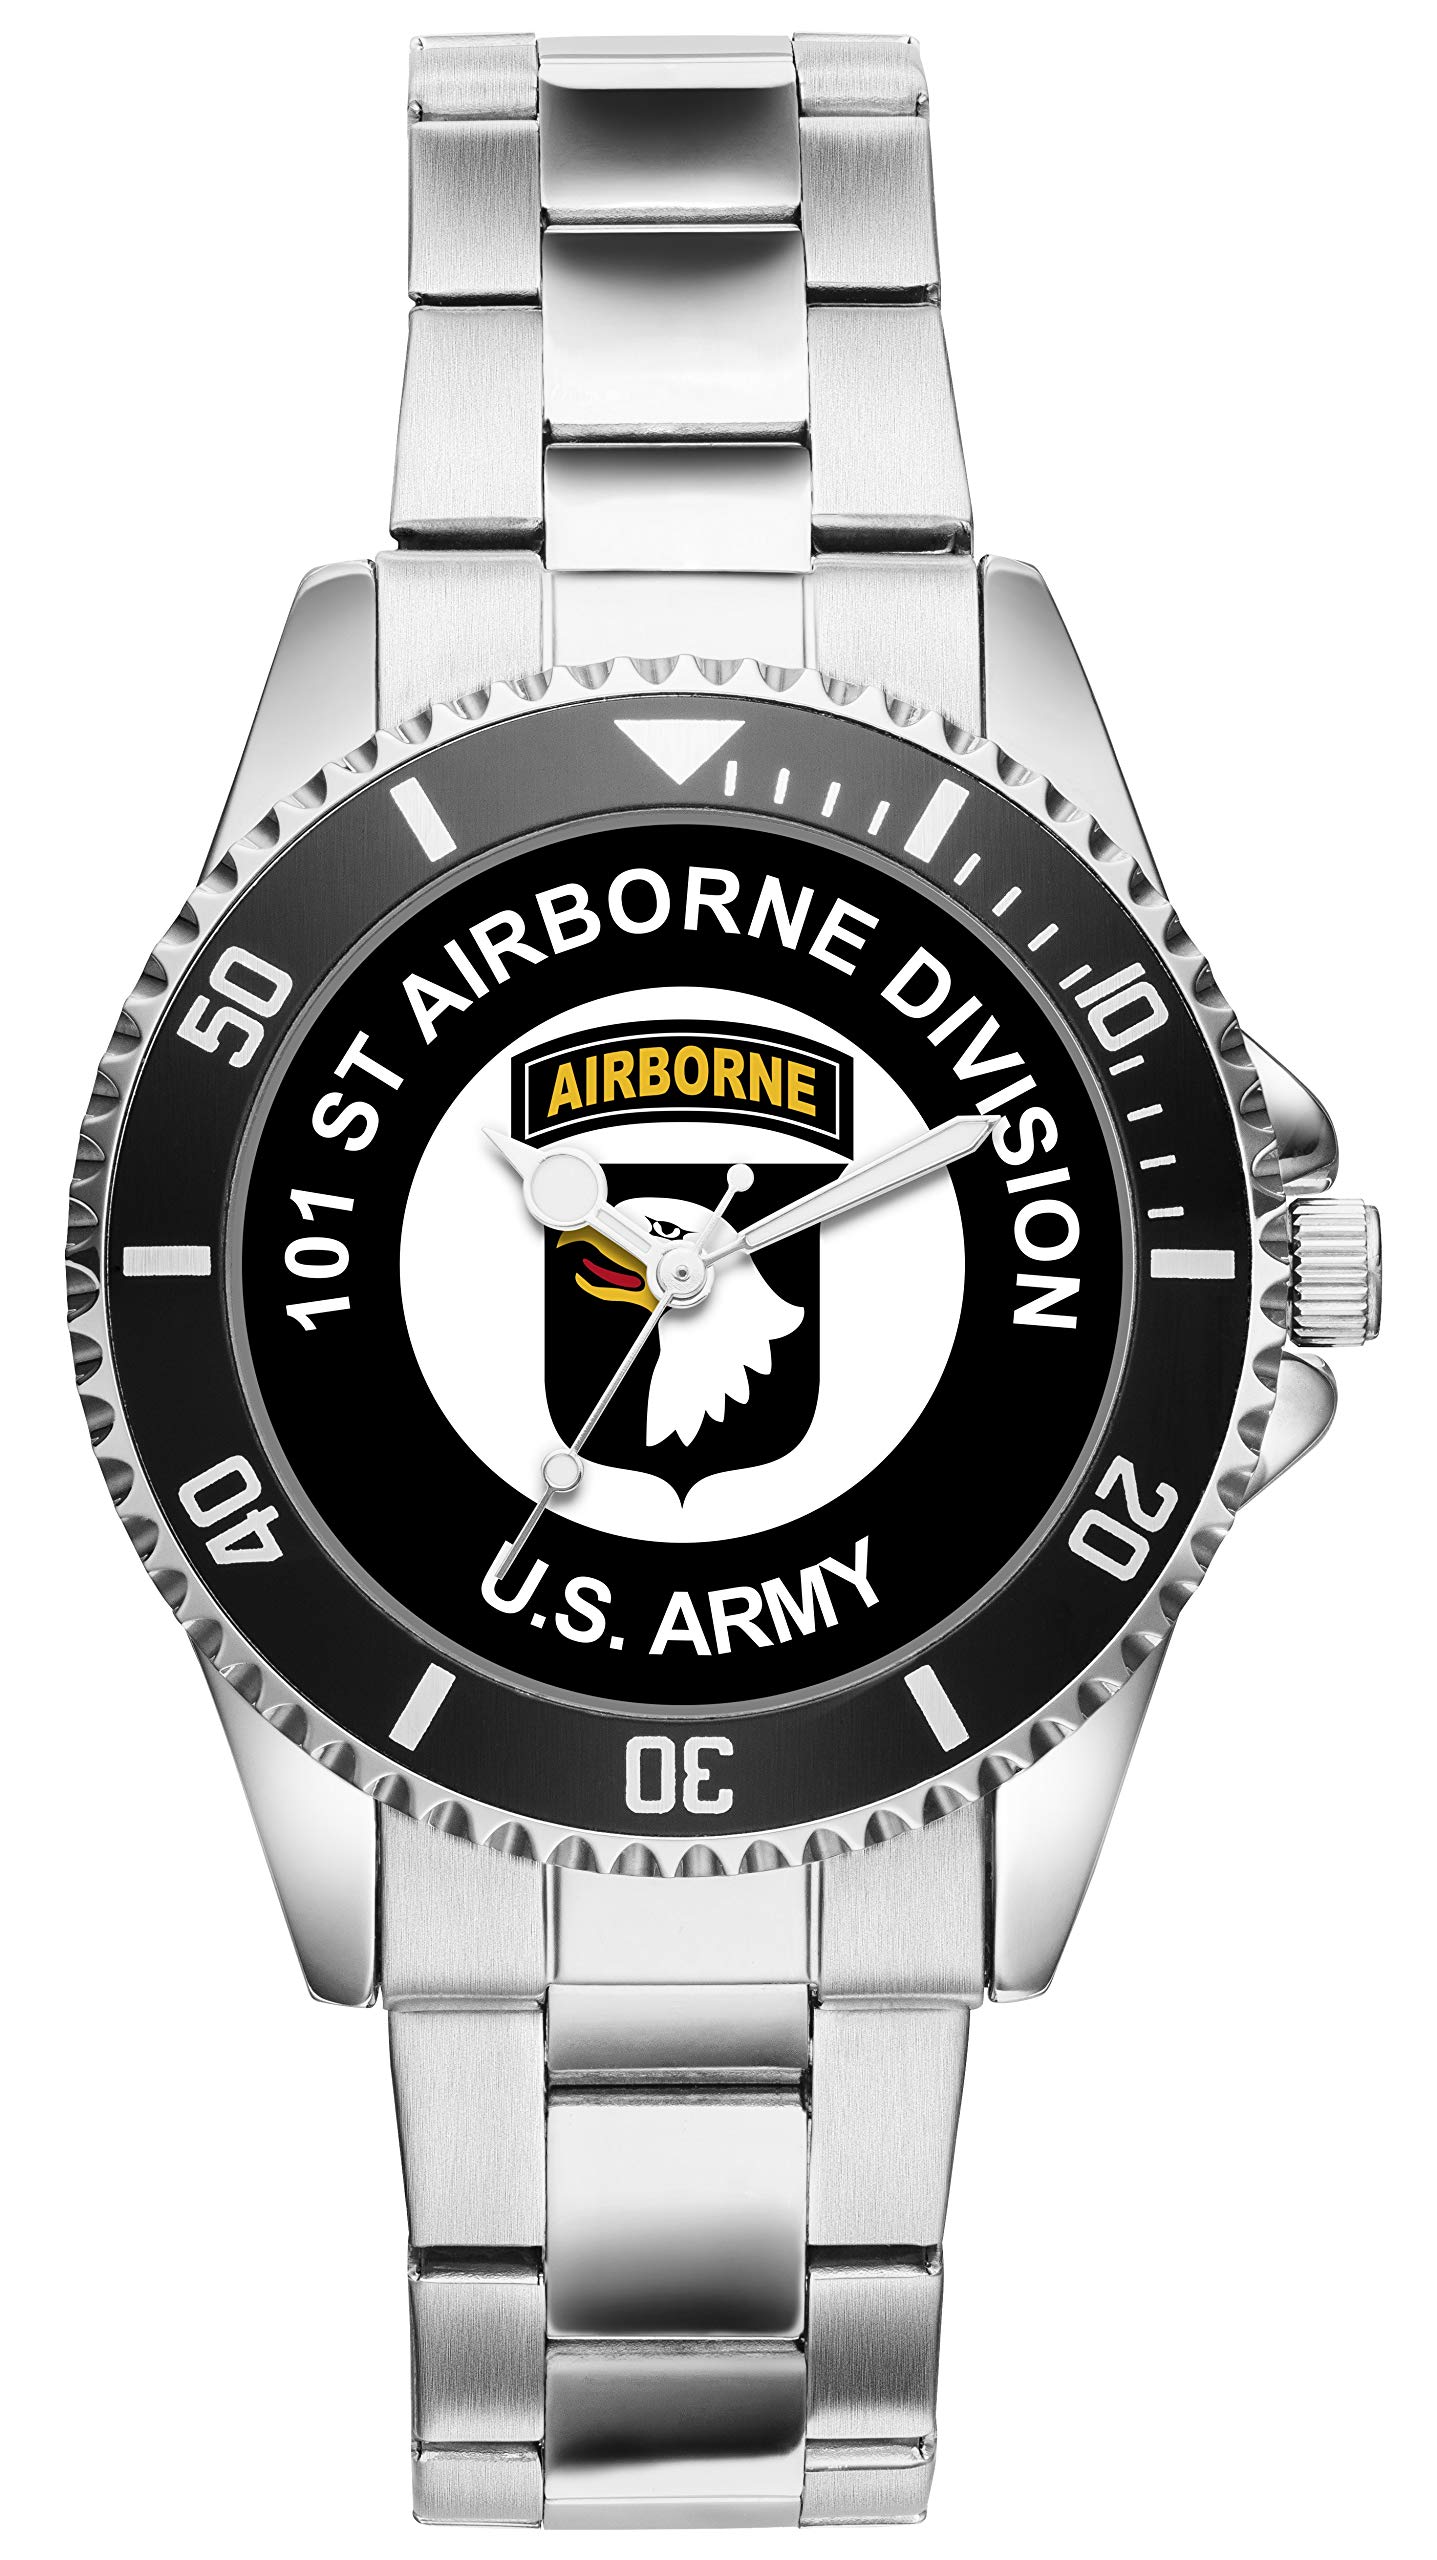 KIESENBERG Gifts for US Army Veteran Military Soldier 101st Airborne Division Watch 6500